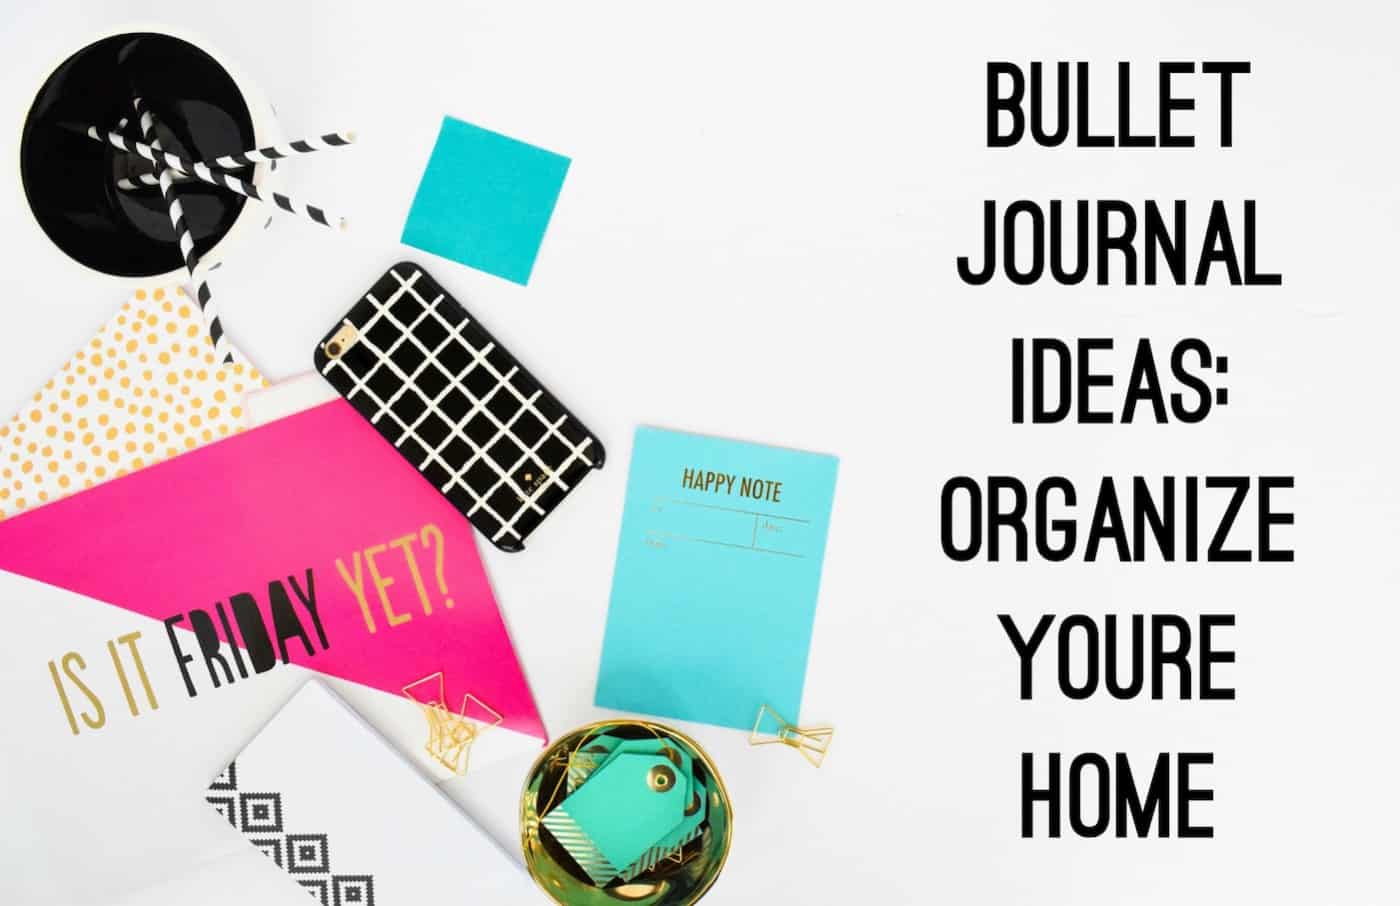 Check out one of these brilliant bullet journal ideas - learn to use your journal for home organization! Declutter, clean, and more with these great tips.